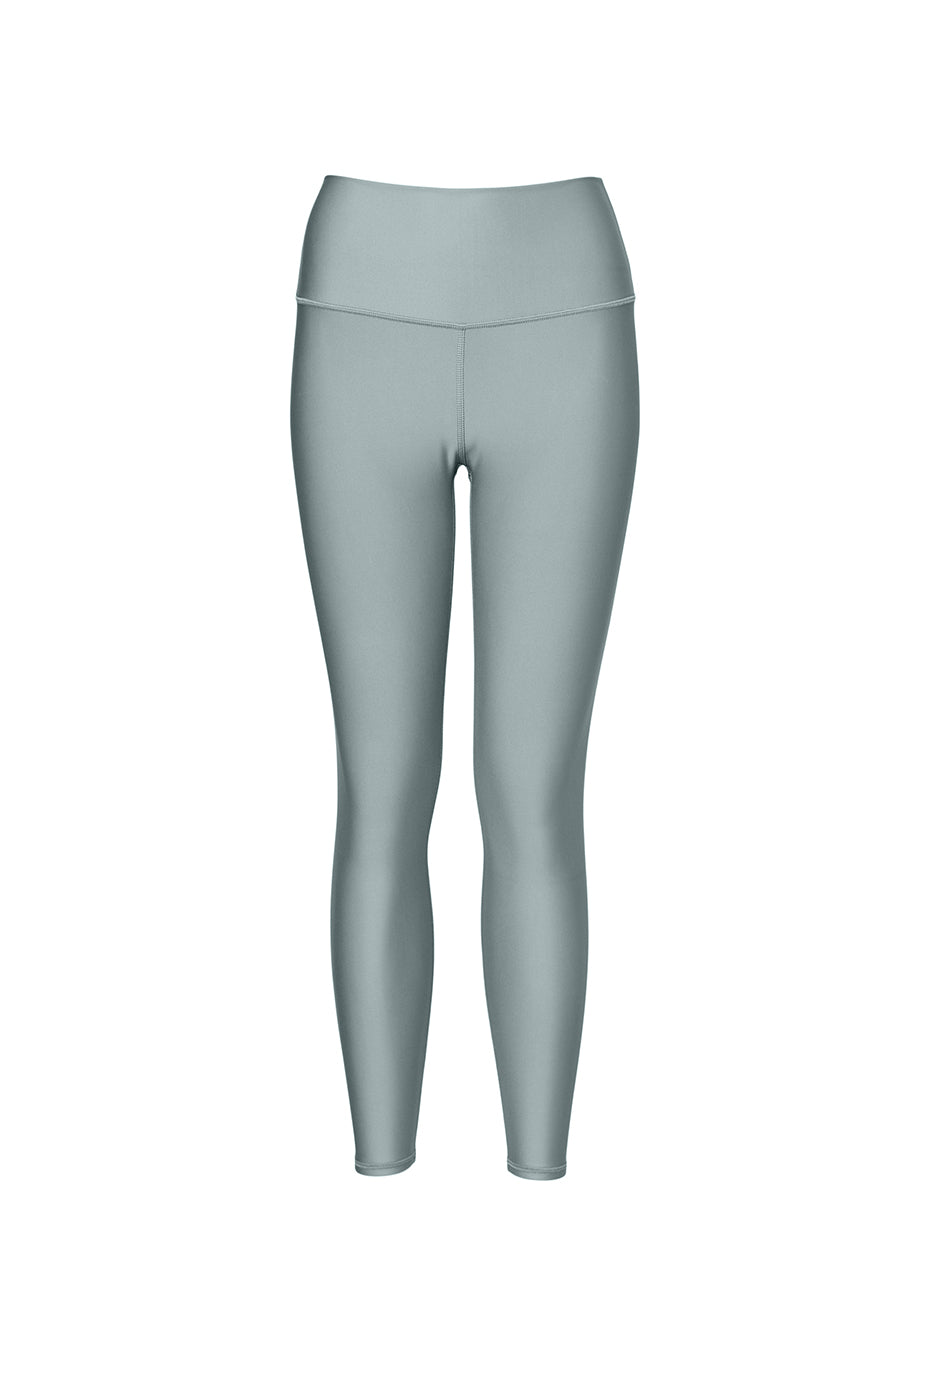 purchases stores Alo Yoga Soft Grey XS NEW Worn Twice Leggings